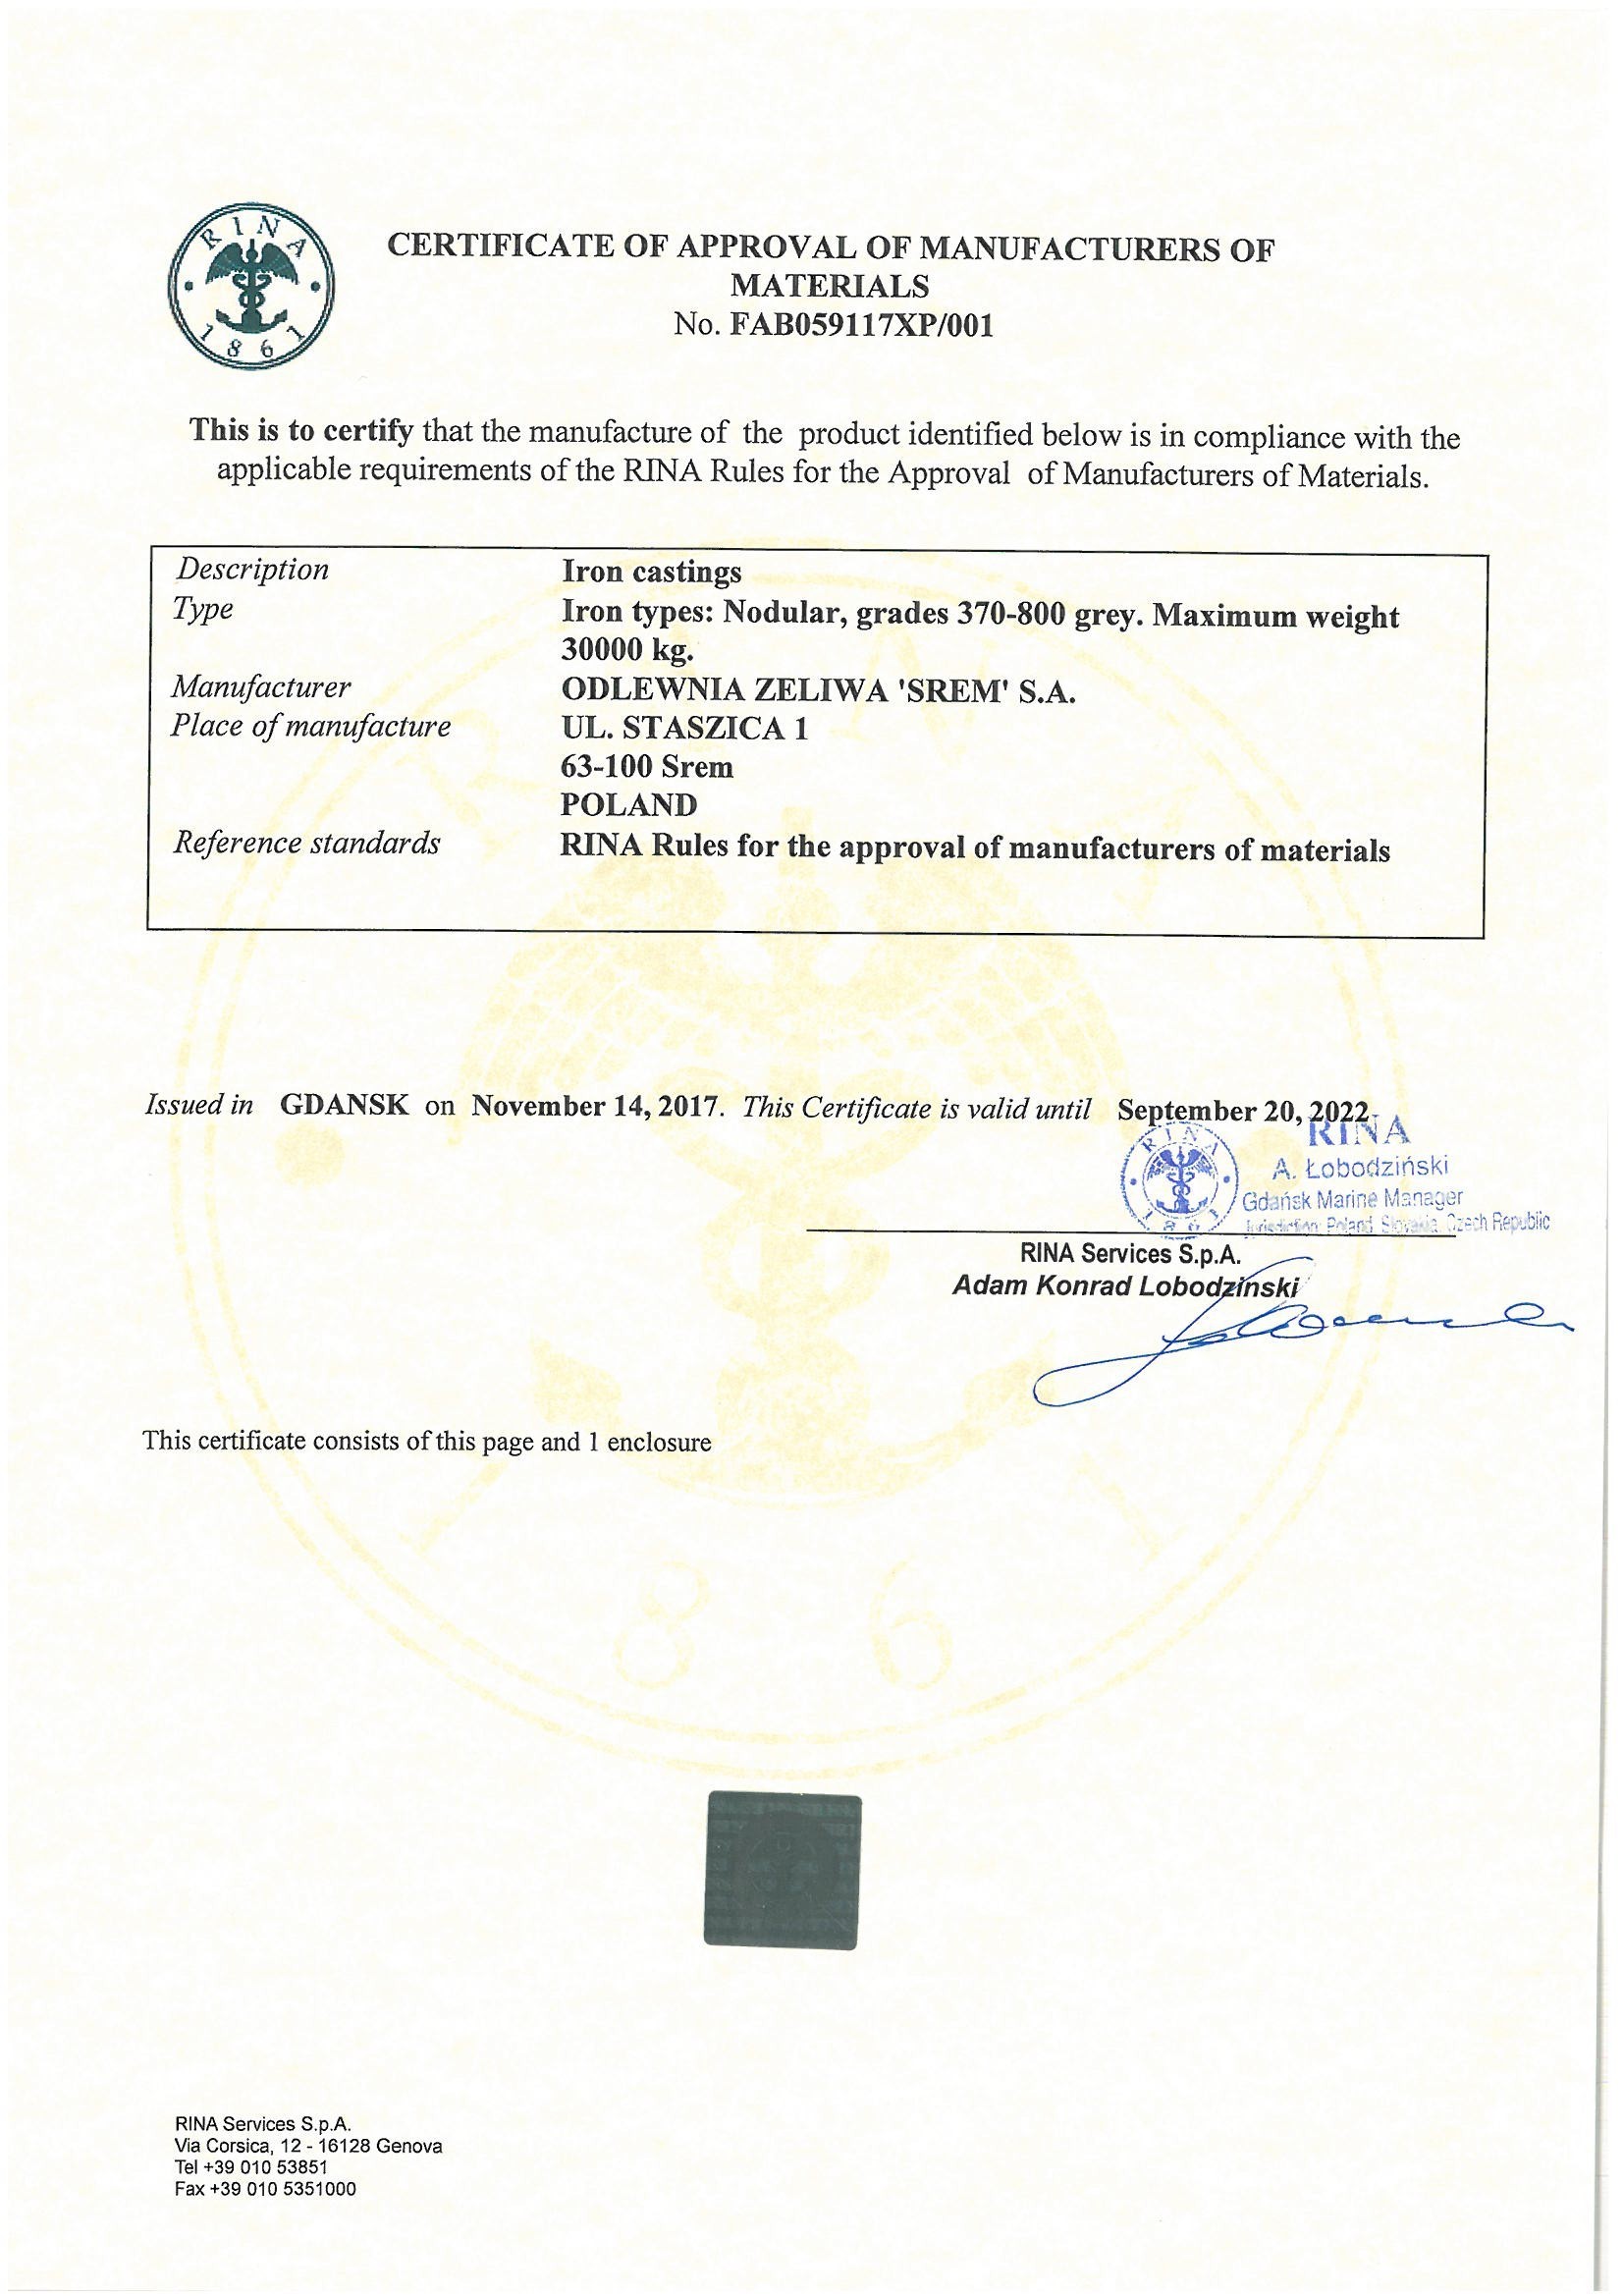 Certificate of Approval of Manufacturers of Materials